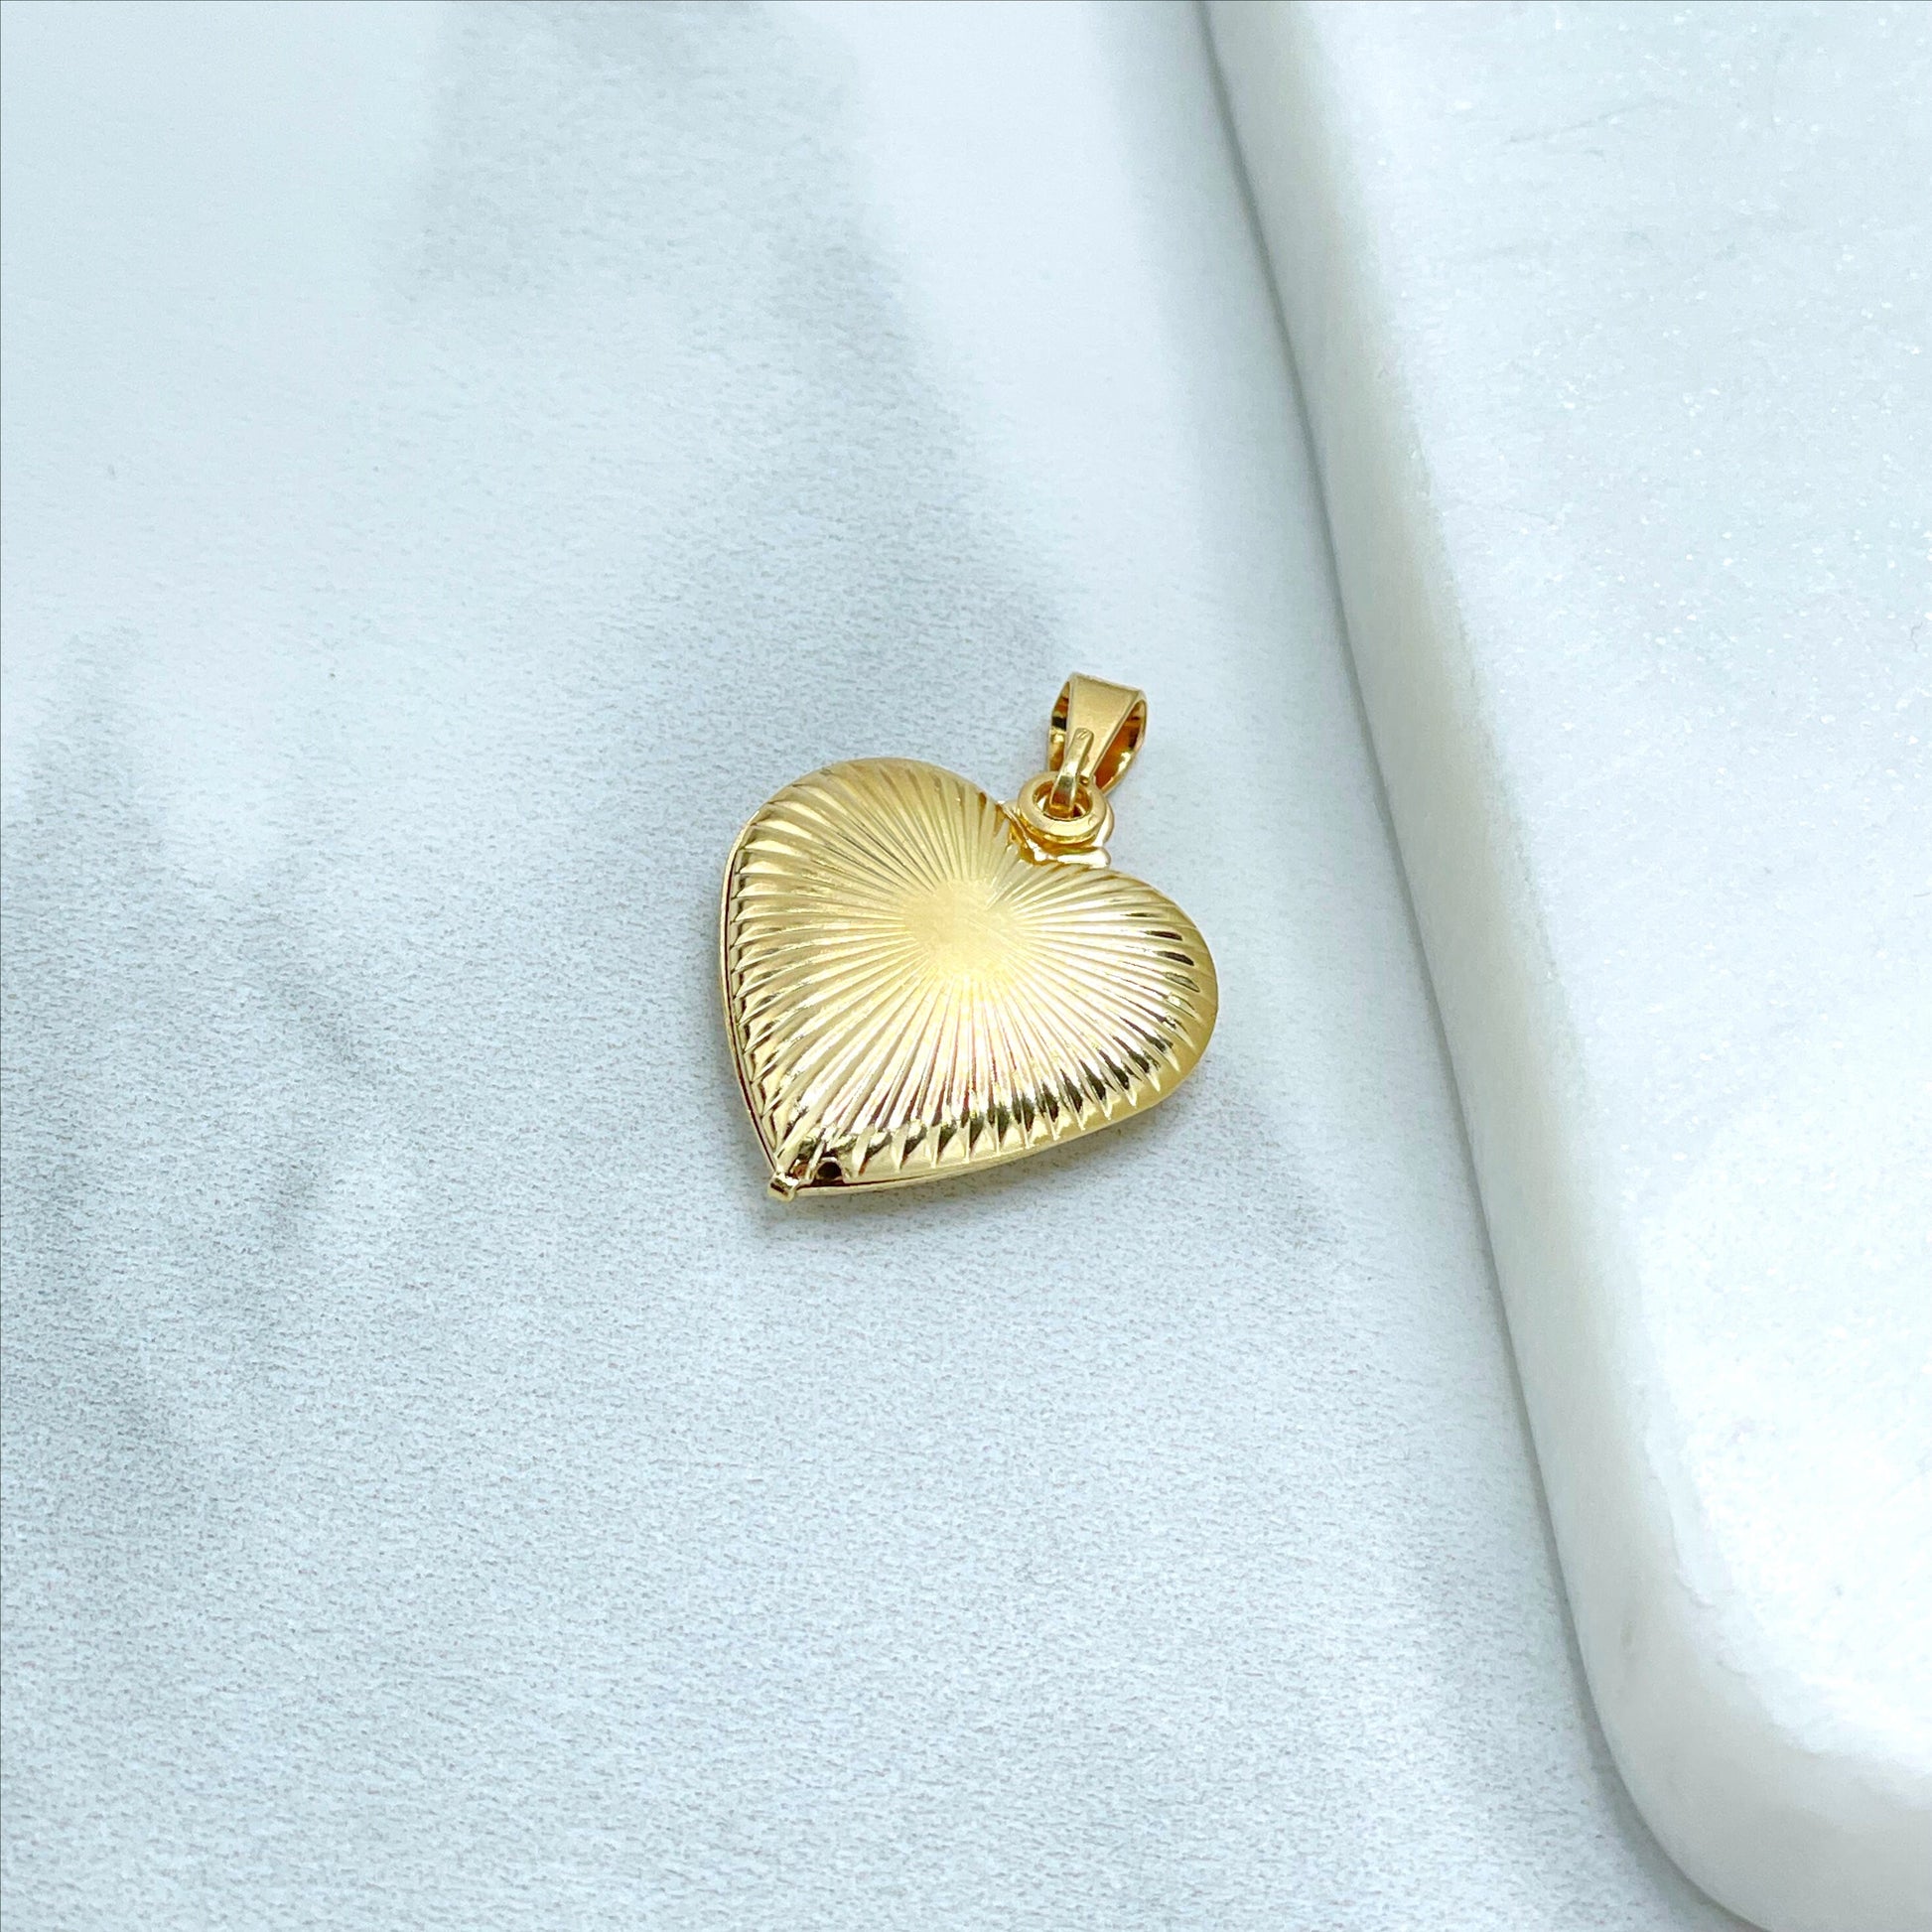 18k Gold Filled Lucky Hamsa Hand, heart Shape Charm Pendant Wholesale Jewelry Making Supplies